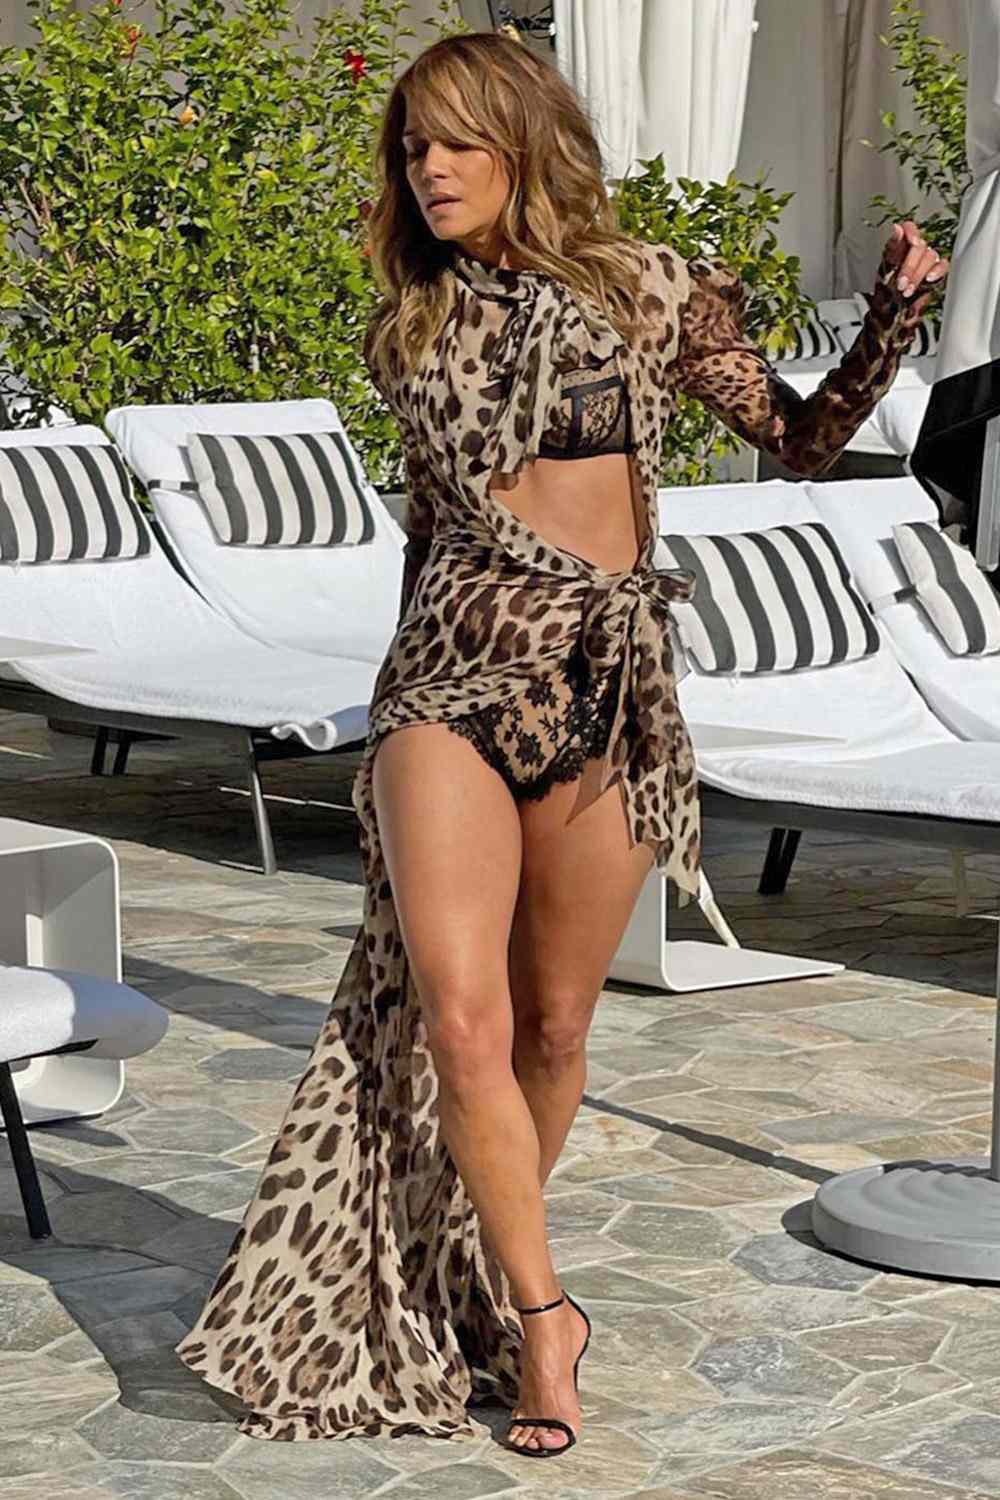 Celebrity Bikini Gallery Claudia Shiffer: https://www.instagram.com/p/CfEZIl6LlY5/ Bethenny Frankel: https://www.instagram.com/p/CepBD5Jvu9K/ Sonja Morgan: https://www.instagram.com/p/CddtioJO0Rr/ Mary J. BLige: https://www.instagram.com/p/CeJduUbL908/ Halle Berry: https://www.instagram.com/p/CZsahYNrl9f/ Christie Brinkley: https://www.instagram.com/p/CYy8iSiOtpv/?hl=en Kelly Bensimon: https://www.gettyimages.com/detail/news-photo/kelly-bensimon-is-seen-on-the-beach-on-june-5 -2022-in-miami-news-photo/1241177454?adppopup=true Jennifer Lopez https://www.instagram.com/p/CeO2Xq6FF2C/?utm_source=ig_embed&ig_rid=6703b0e1-8bd4- 41d8-8db6-9b98bf6d170f Lucy Liu: https://www.instagram.com/p/CdRumLLutnv/?utm_source=ig_embed&ig_rid=2150d02b-df25-43 c2-8a9f-822d2fe170c9 (technically not a bikini but I think we have a one-piece somewhere in there!) Cynthia Bailey: https://www.instagram.com/p/CcbxDH9pBQm/ Elizabeth Hurley: https://www.instagram.com/p/CcOJ7GmokJo/ and https://www.instagram.com/p/CZC3t3jo0Rt/ Lisa Rinna: https://www.instagram.com/p/CTaJhjppUne/?utm_source=ig_embed&ig_rid=093479ea-65fb-48c a-99dd-cbc6586b7387